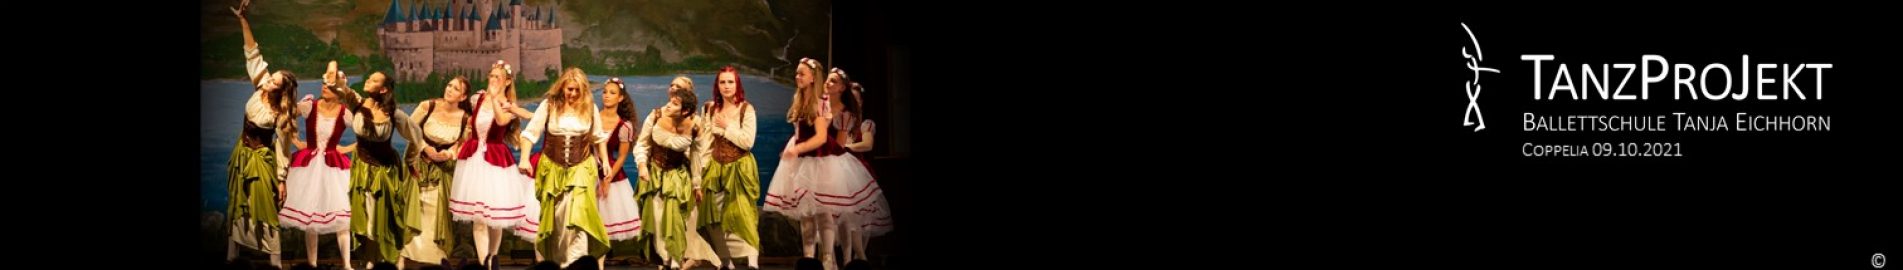 cropped-Coppelia-Banner041.jpg